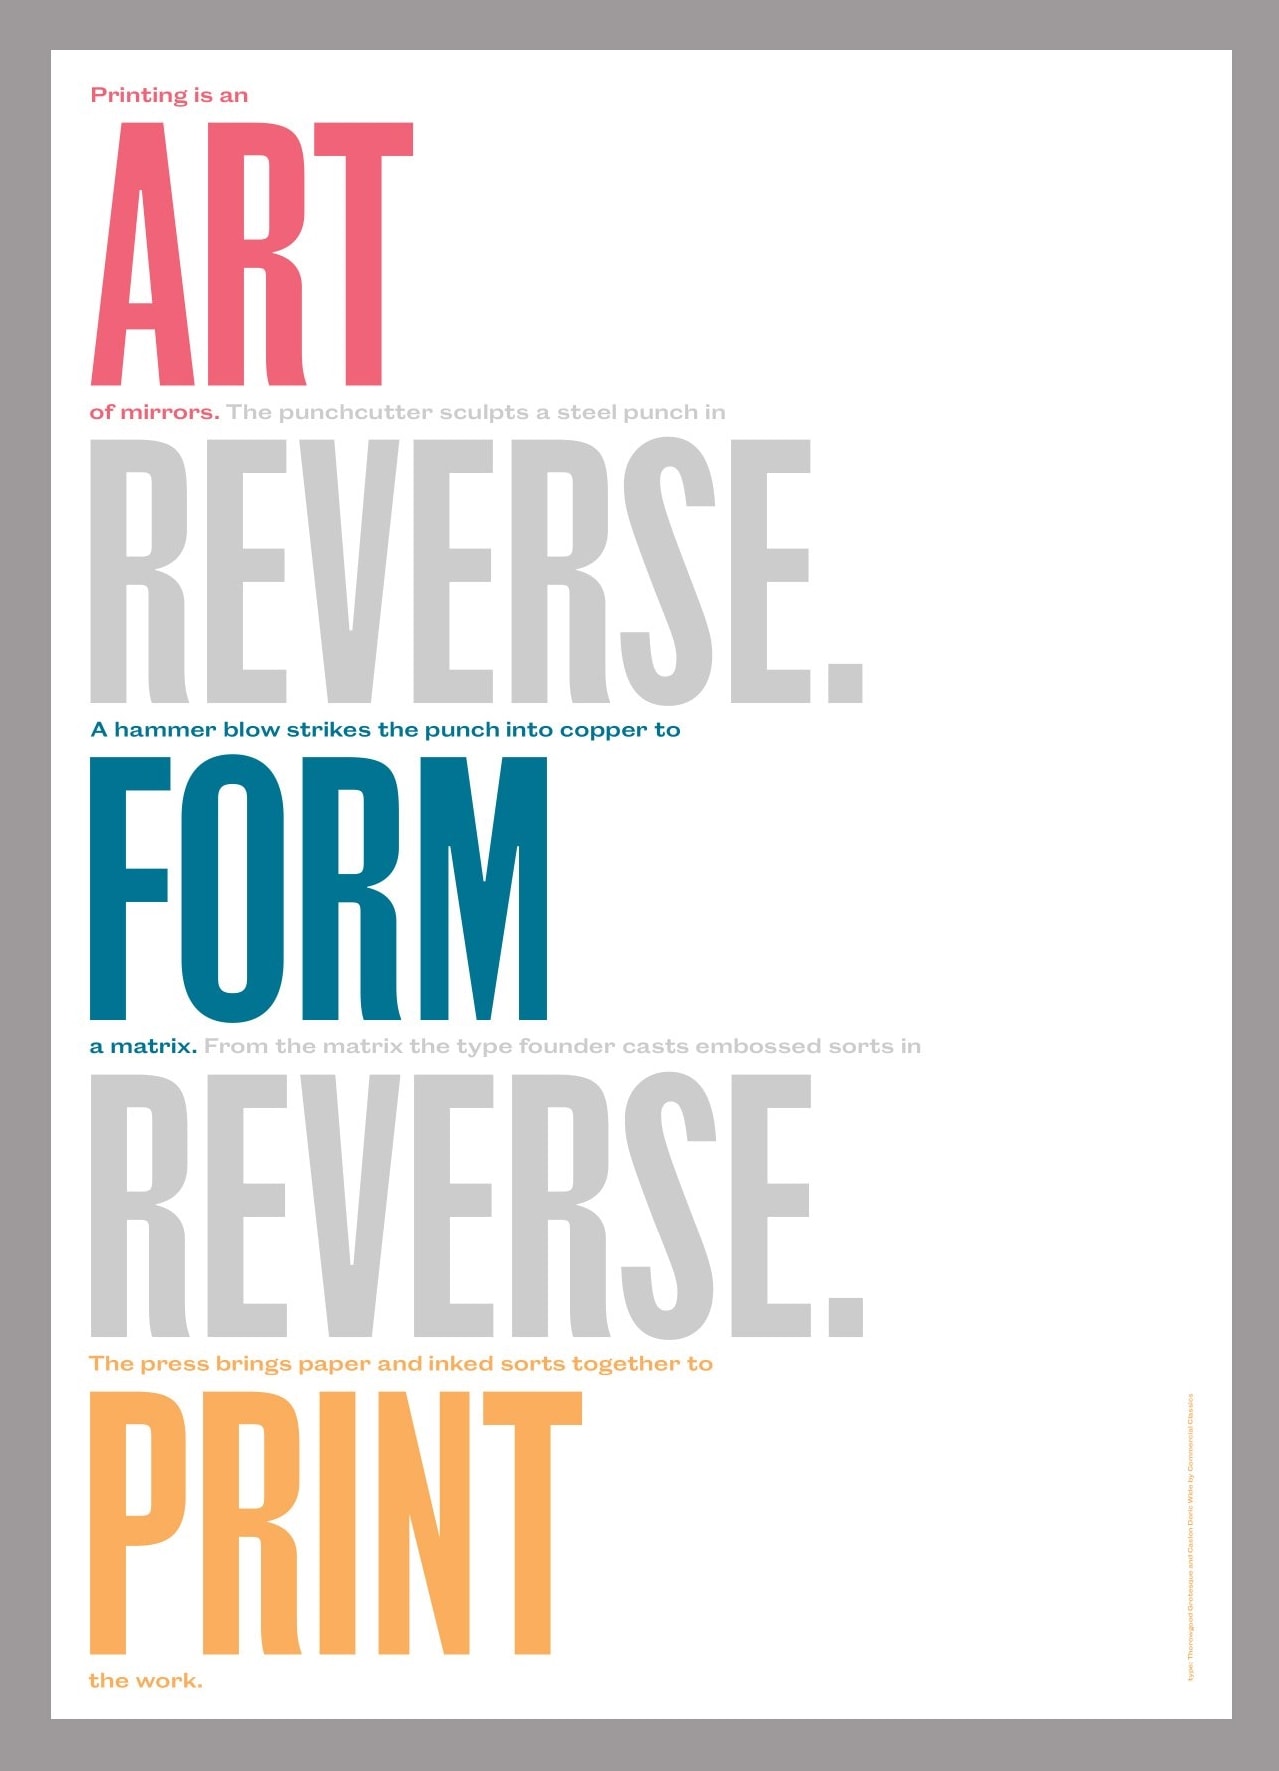 Typographic poster by Tom Etherington and Keith Houston featuring show-through text printed in reverse